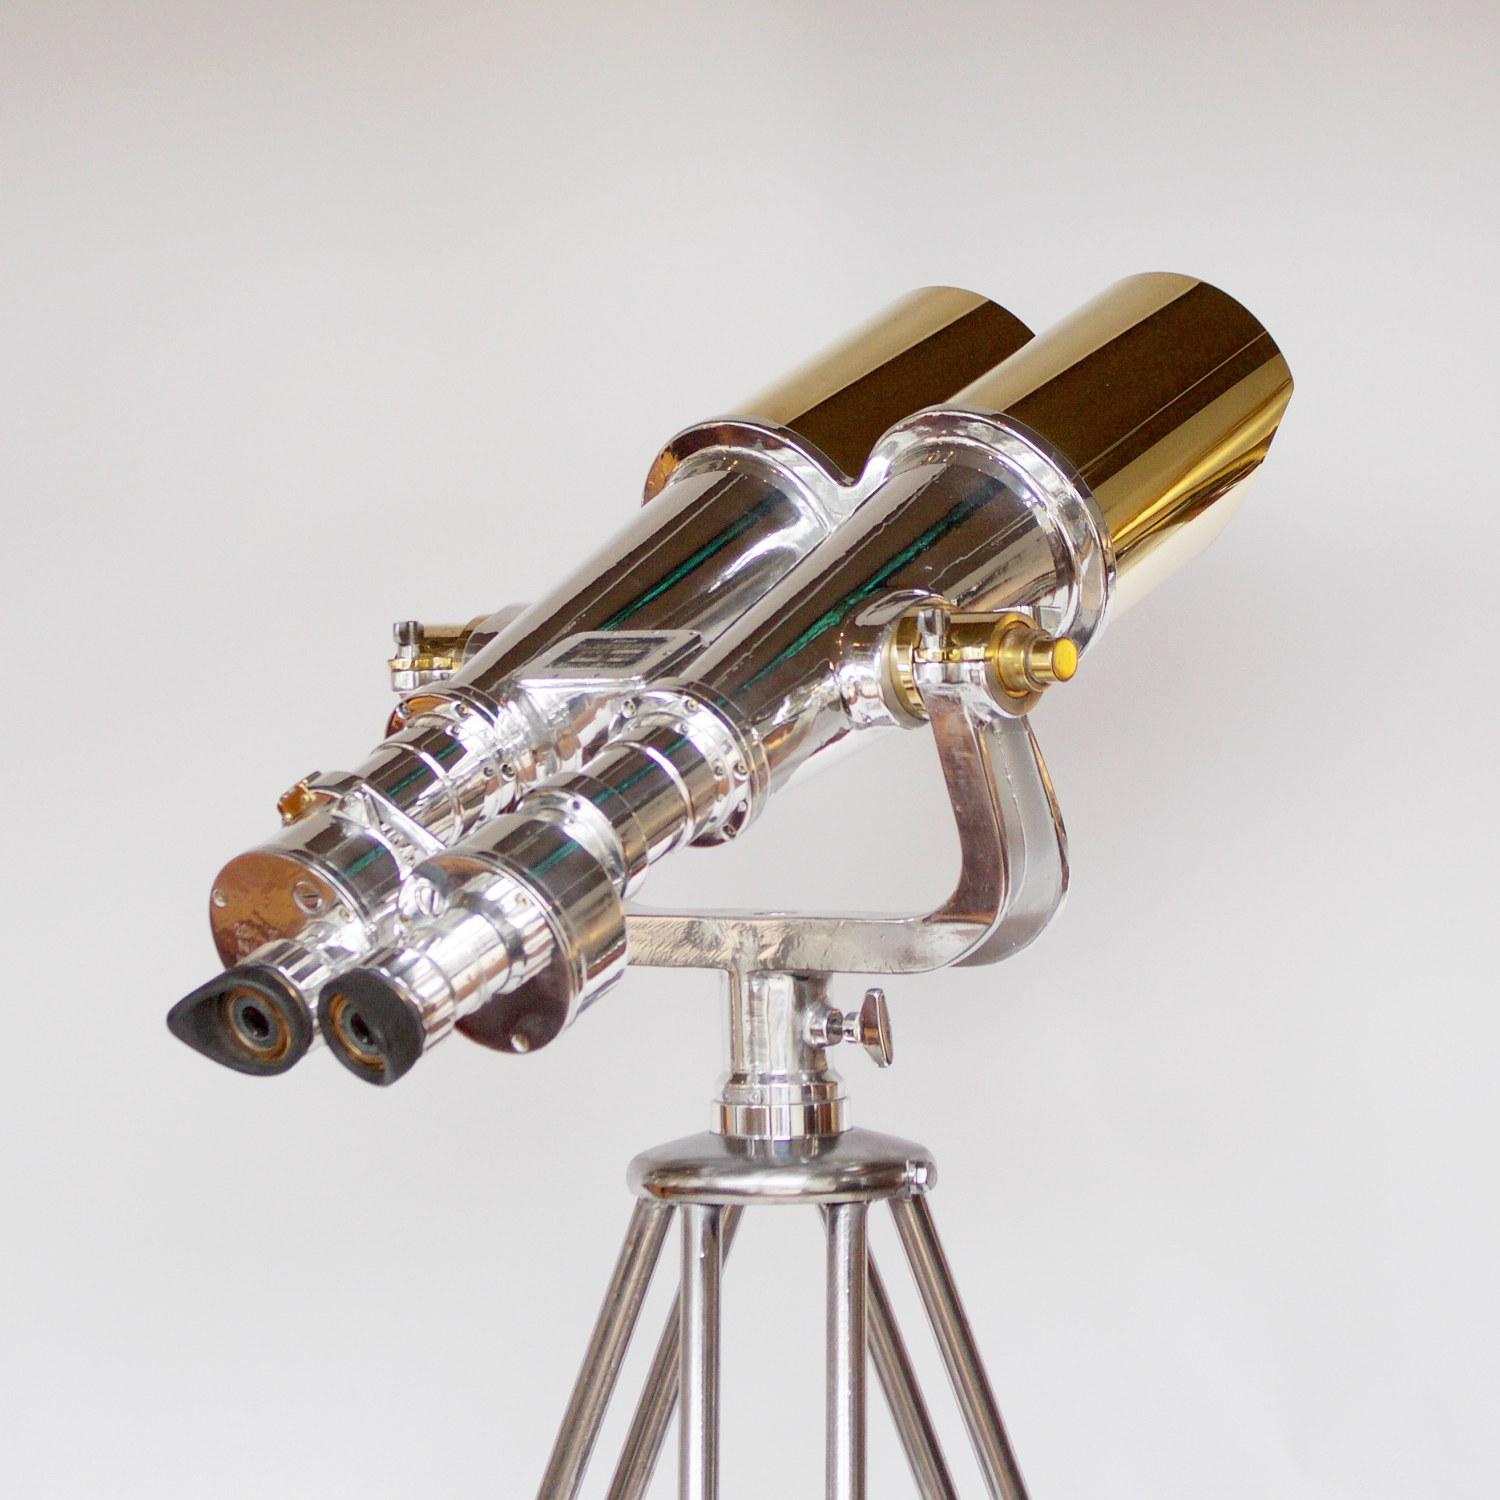 A pair of chromed metal and brass Nikon 20 x 120 WW11 Naval Binoculars. Set on an original 1940s military, re-polished metal stand.

20x magnification with 120mm objective lenses. Paint stripped and metal polished. Optics fully